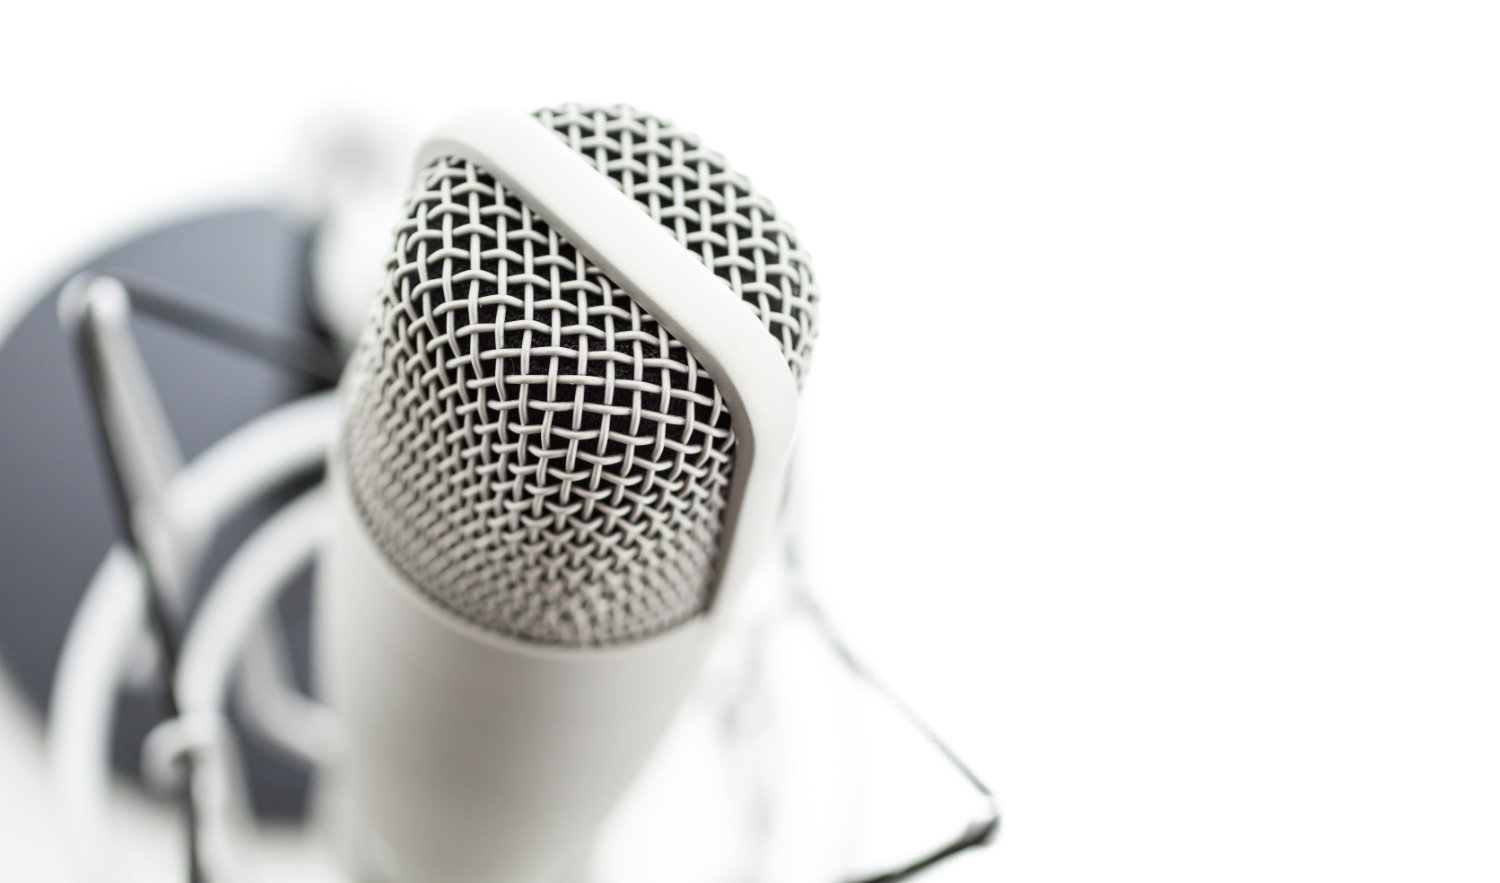 Podcast microphone on white background